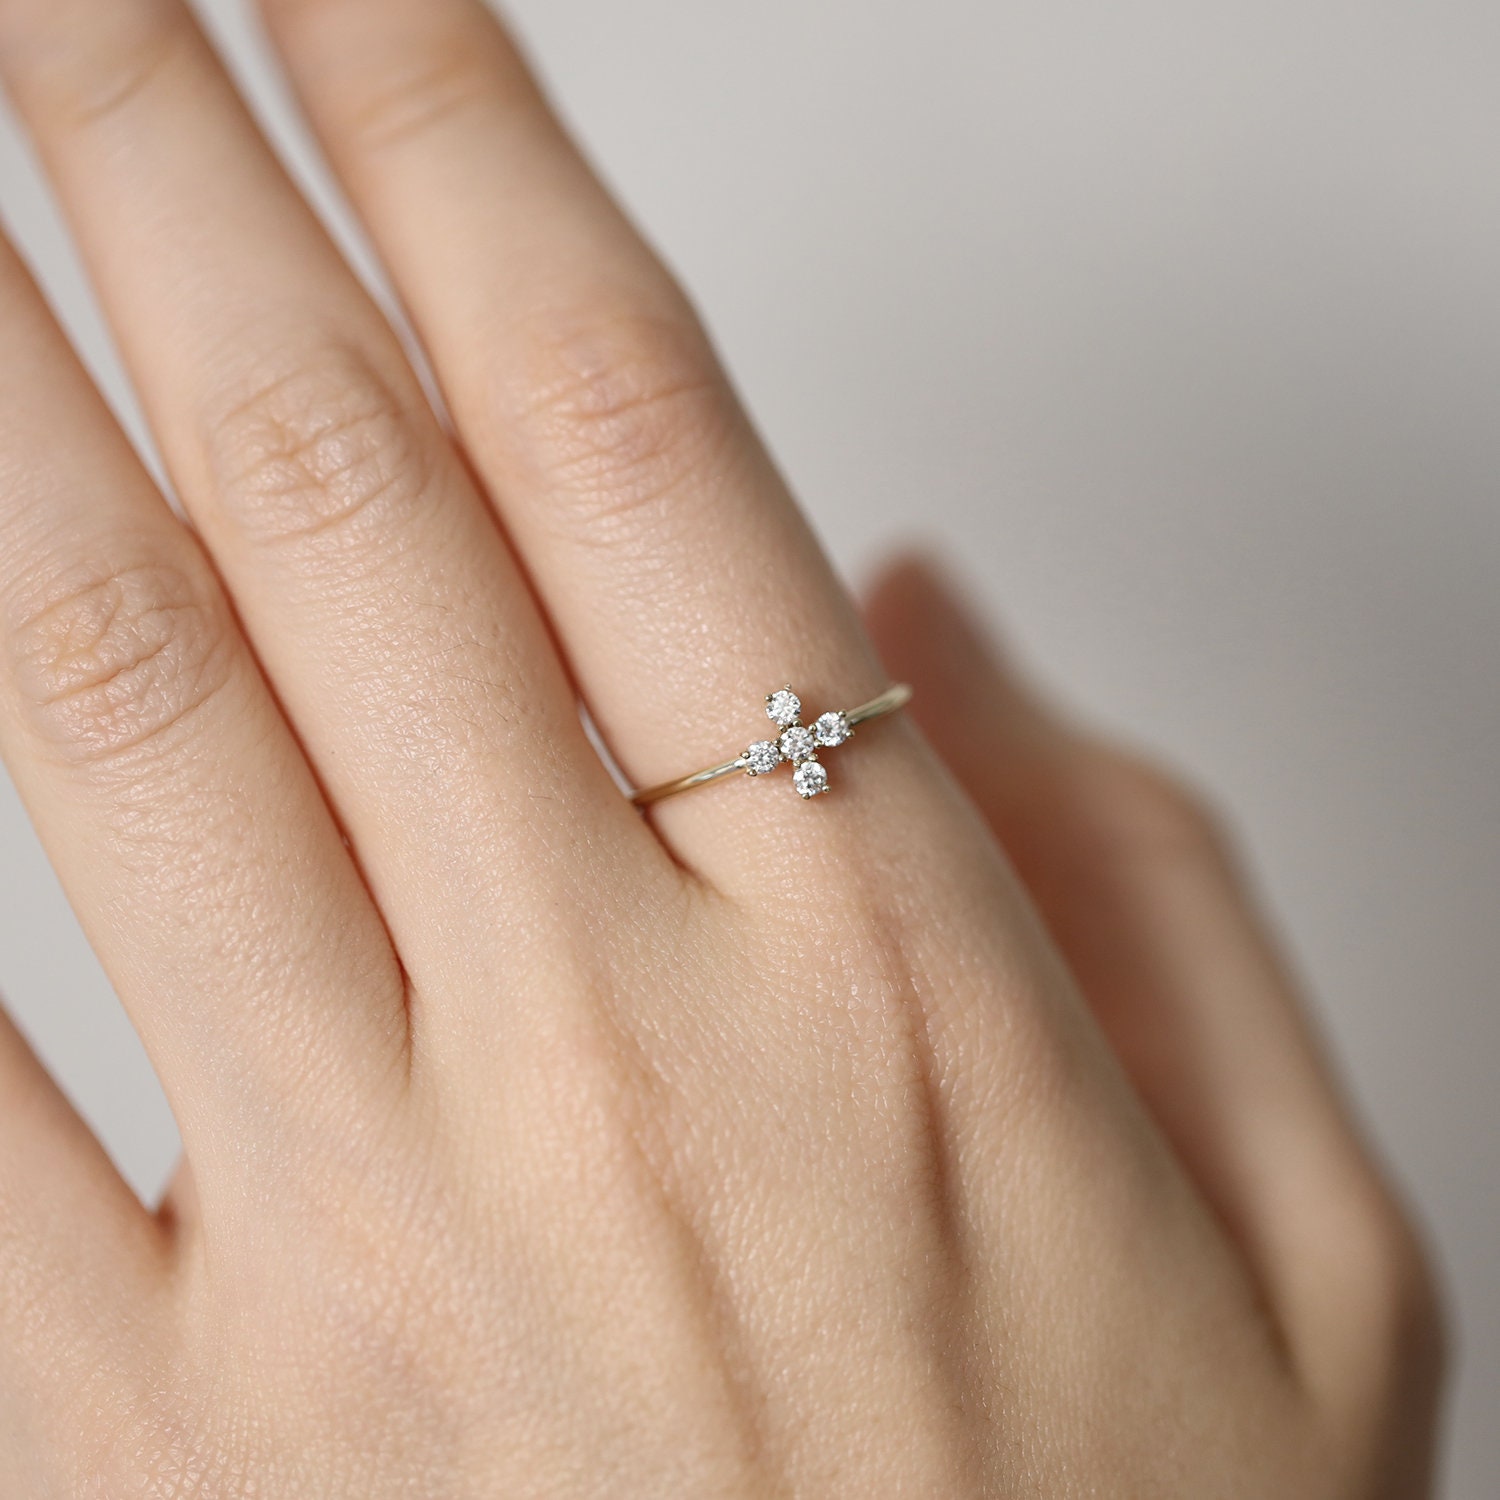 Meteorite Engagement Ring with Diamond Flower Shape | Jewelry by Johan -  4.25 / 14k White Gold - Jewelry by Johan